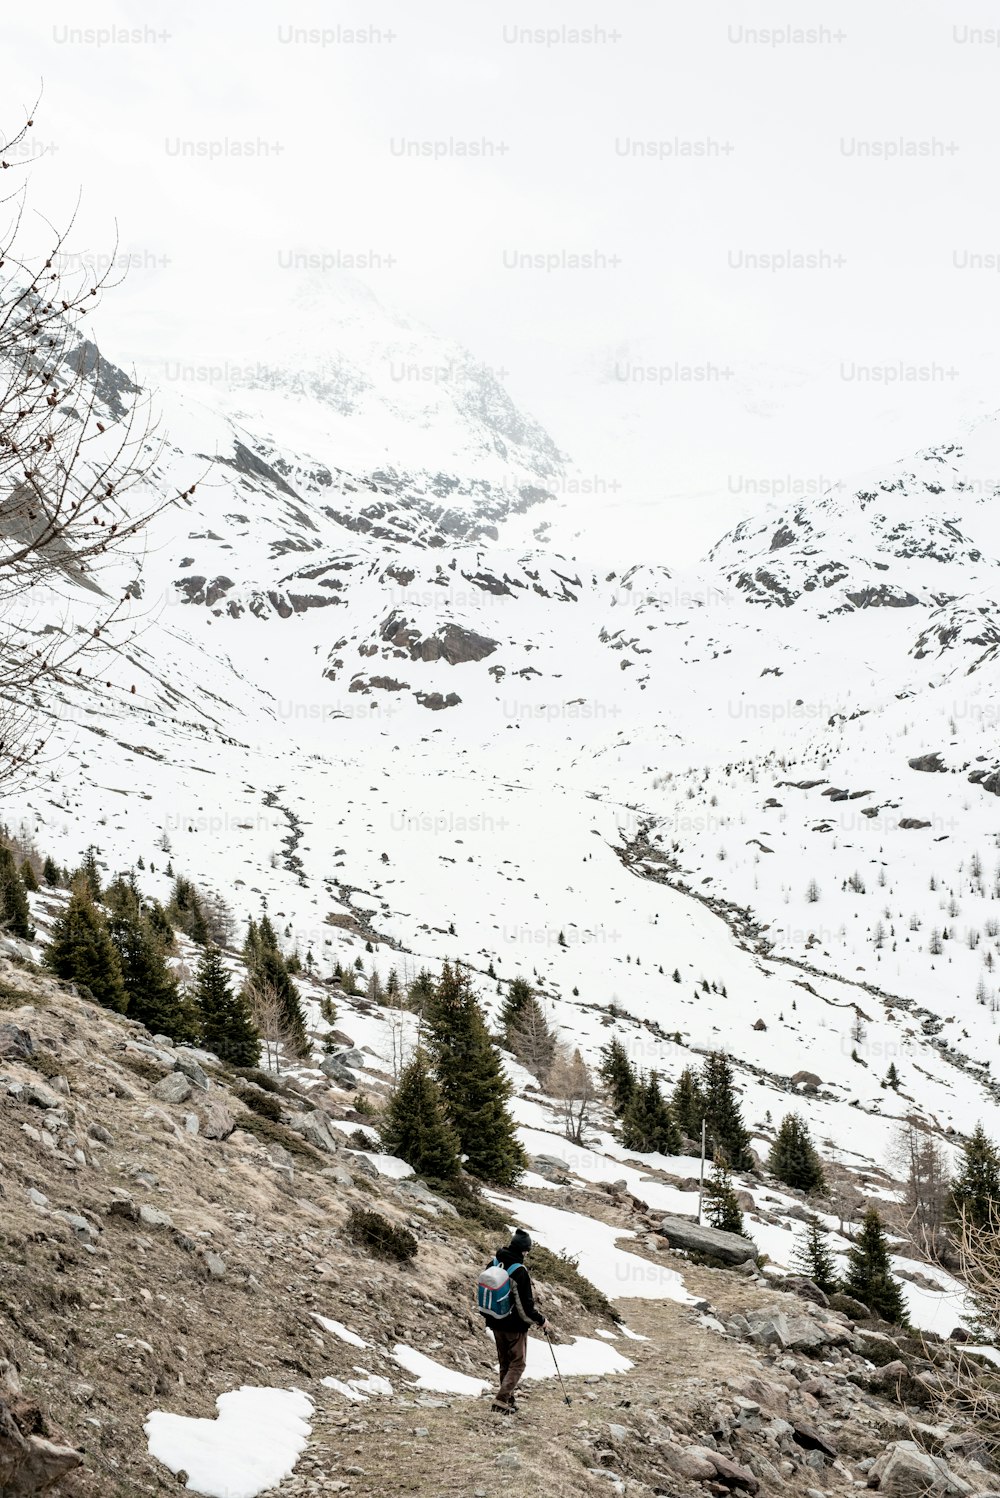 a person hiking up a snowy mountain with a backpack